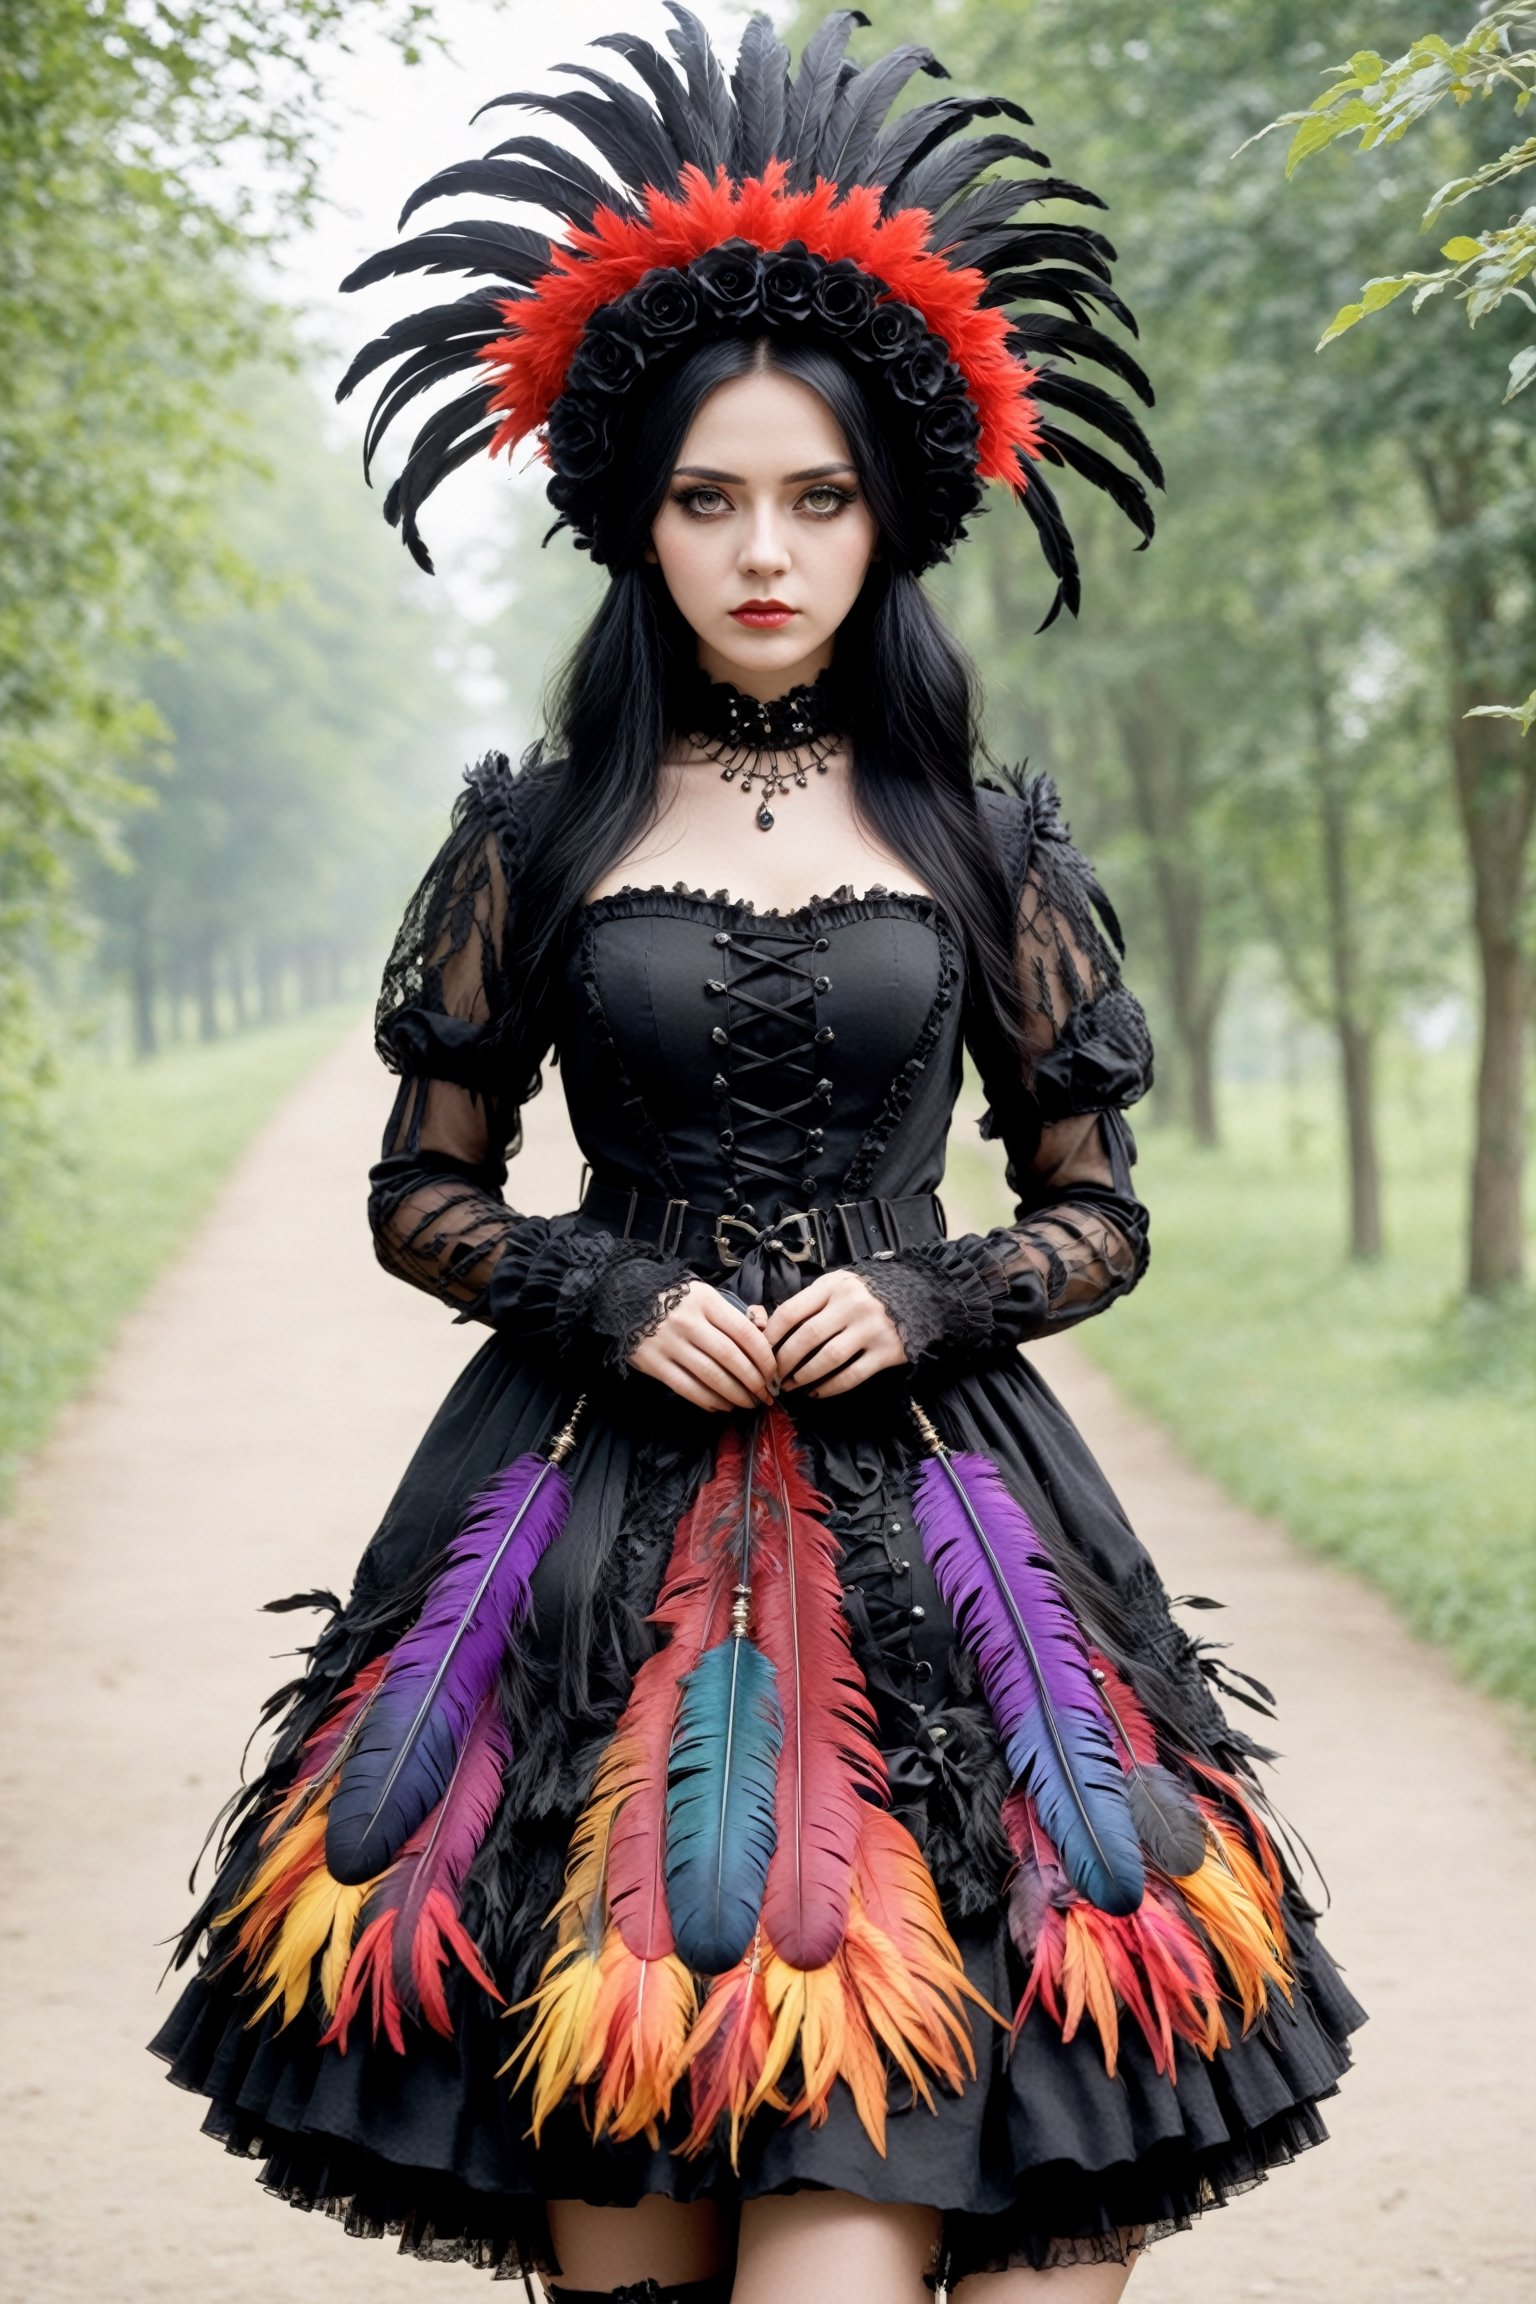 1girl,Eagle feathers, feather bonnet,
Gothic themed fashion style girls, gorgeous colorful dresses with colorful feathers, as if their entire body is wrapped in raven feathers,goth person,18thcentury,b3rli,solution epsilon \(overlord\)